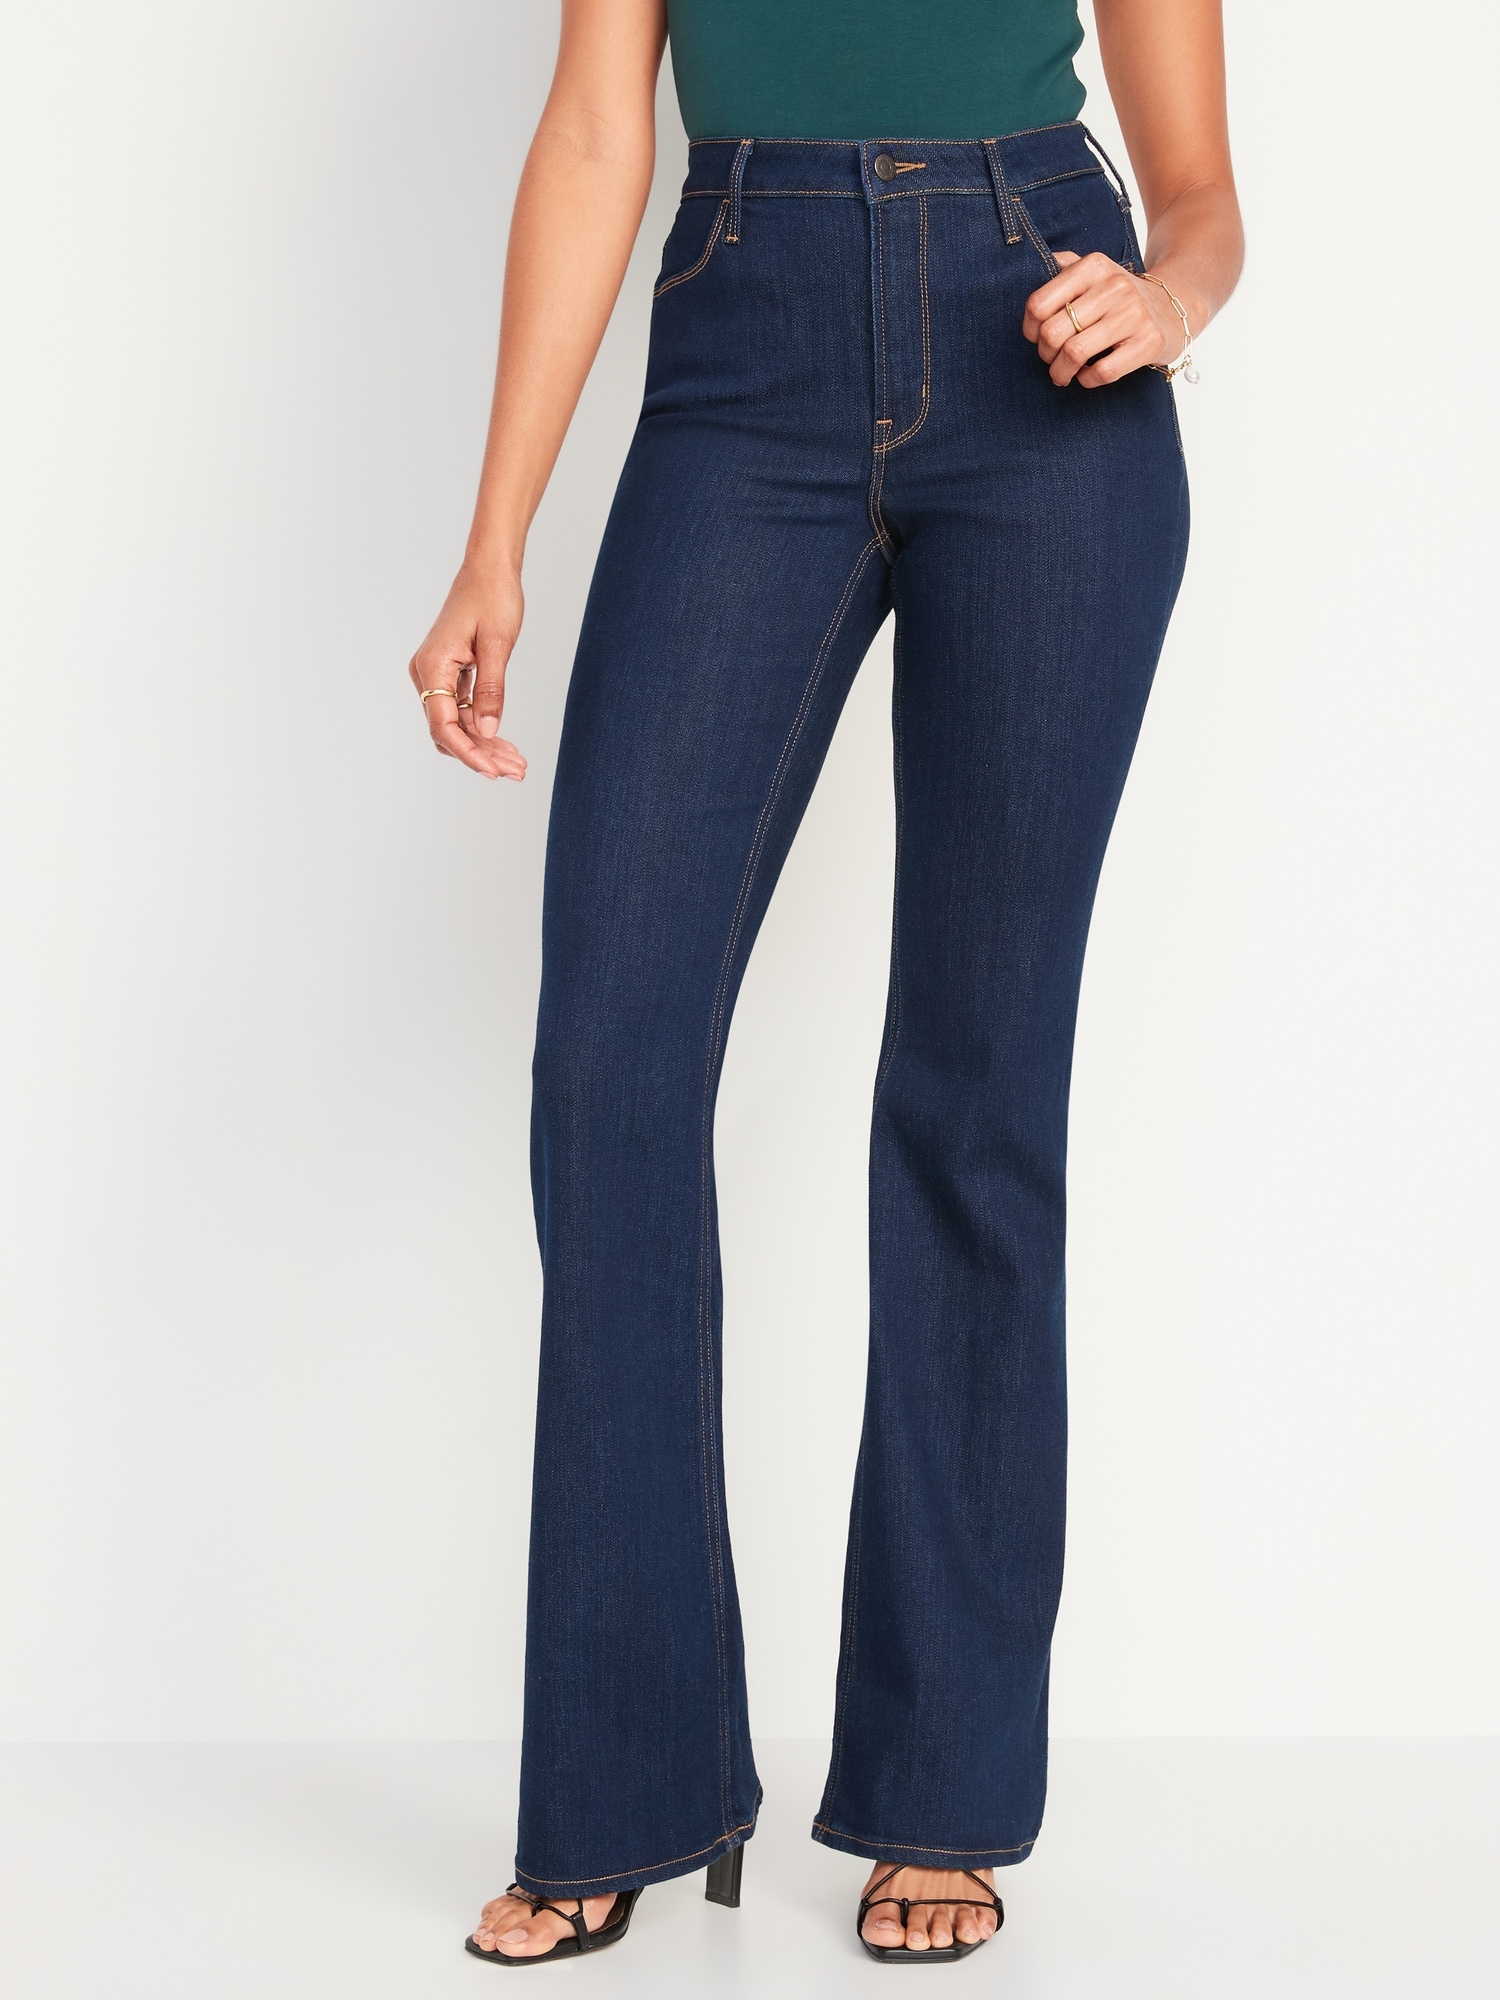 Extra High-Waisted Flare Jeans for Women, Old Navy